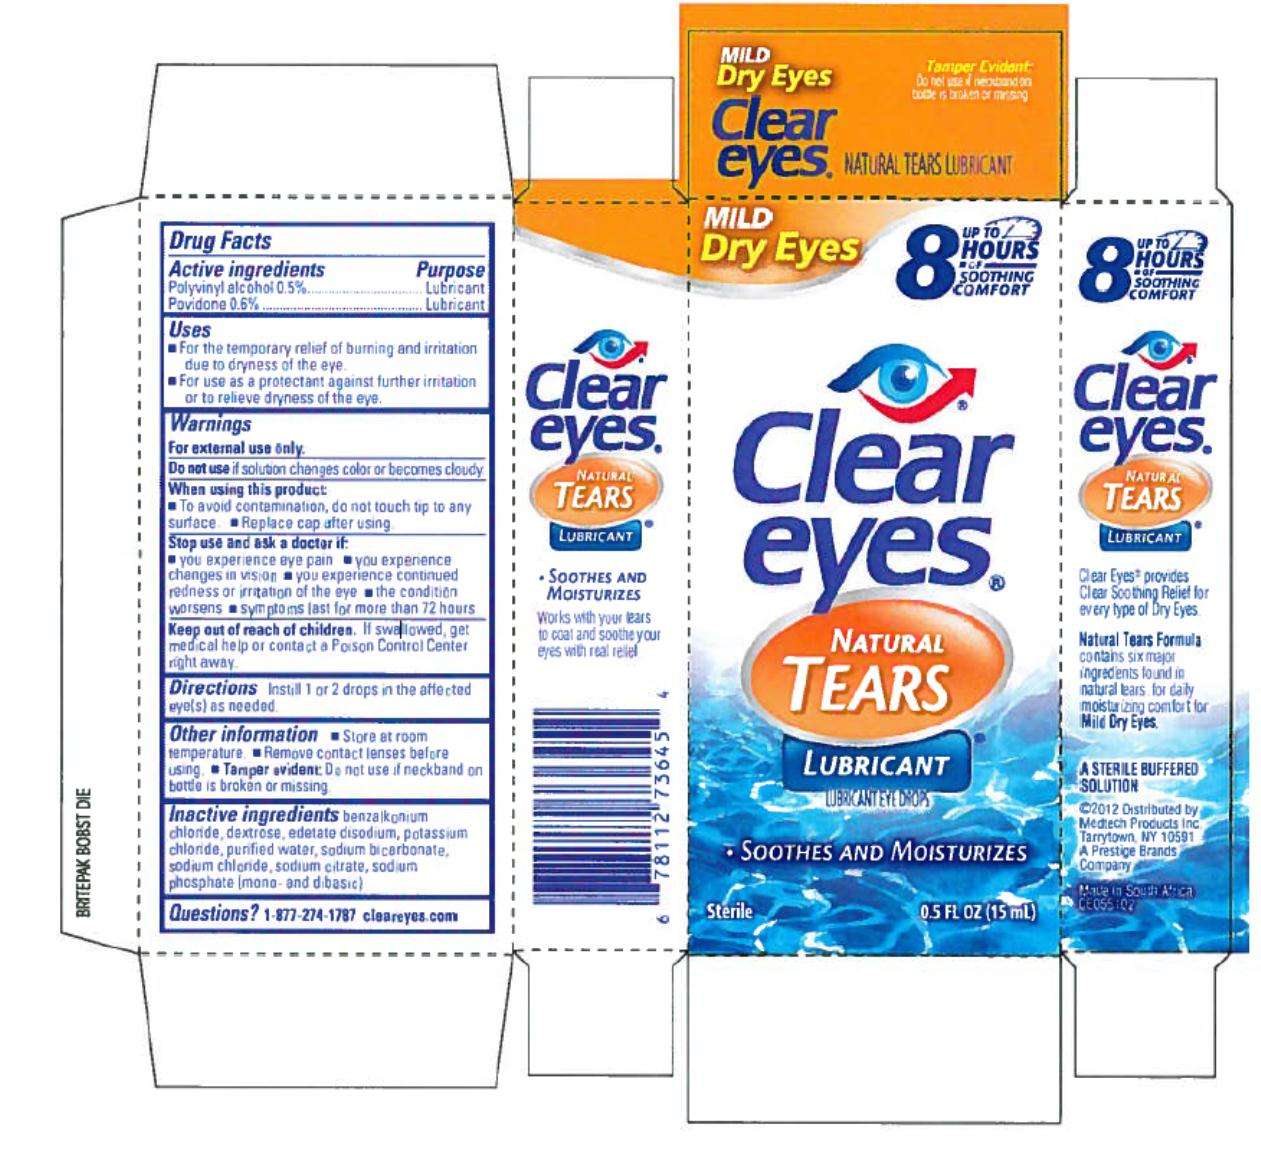 Clear Eyes Natural Tears